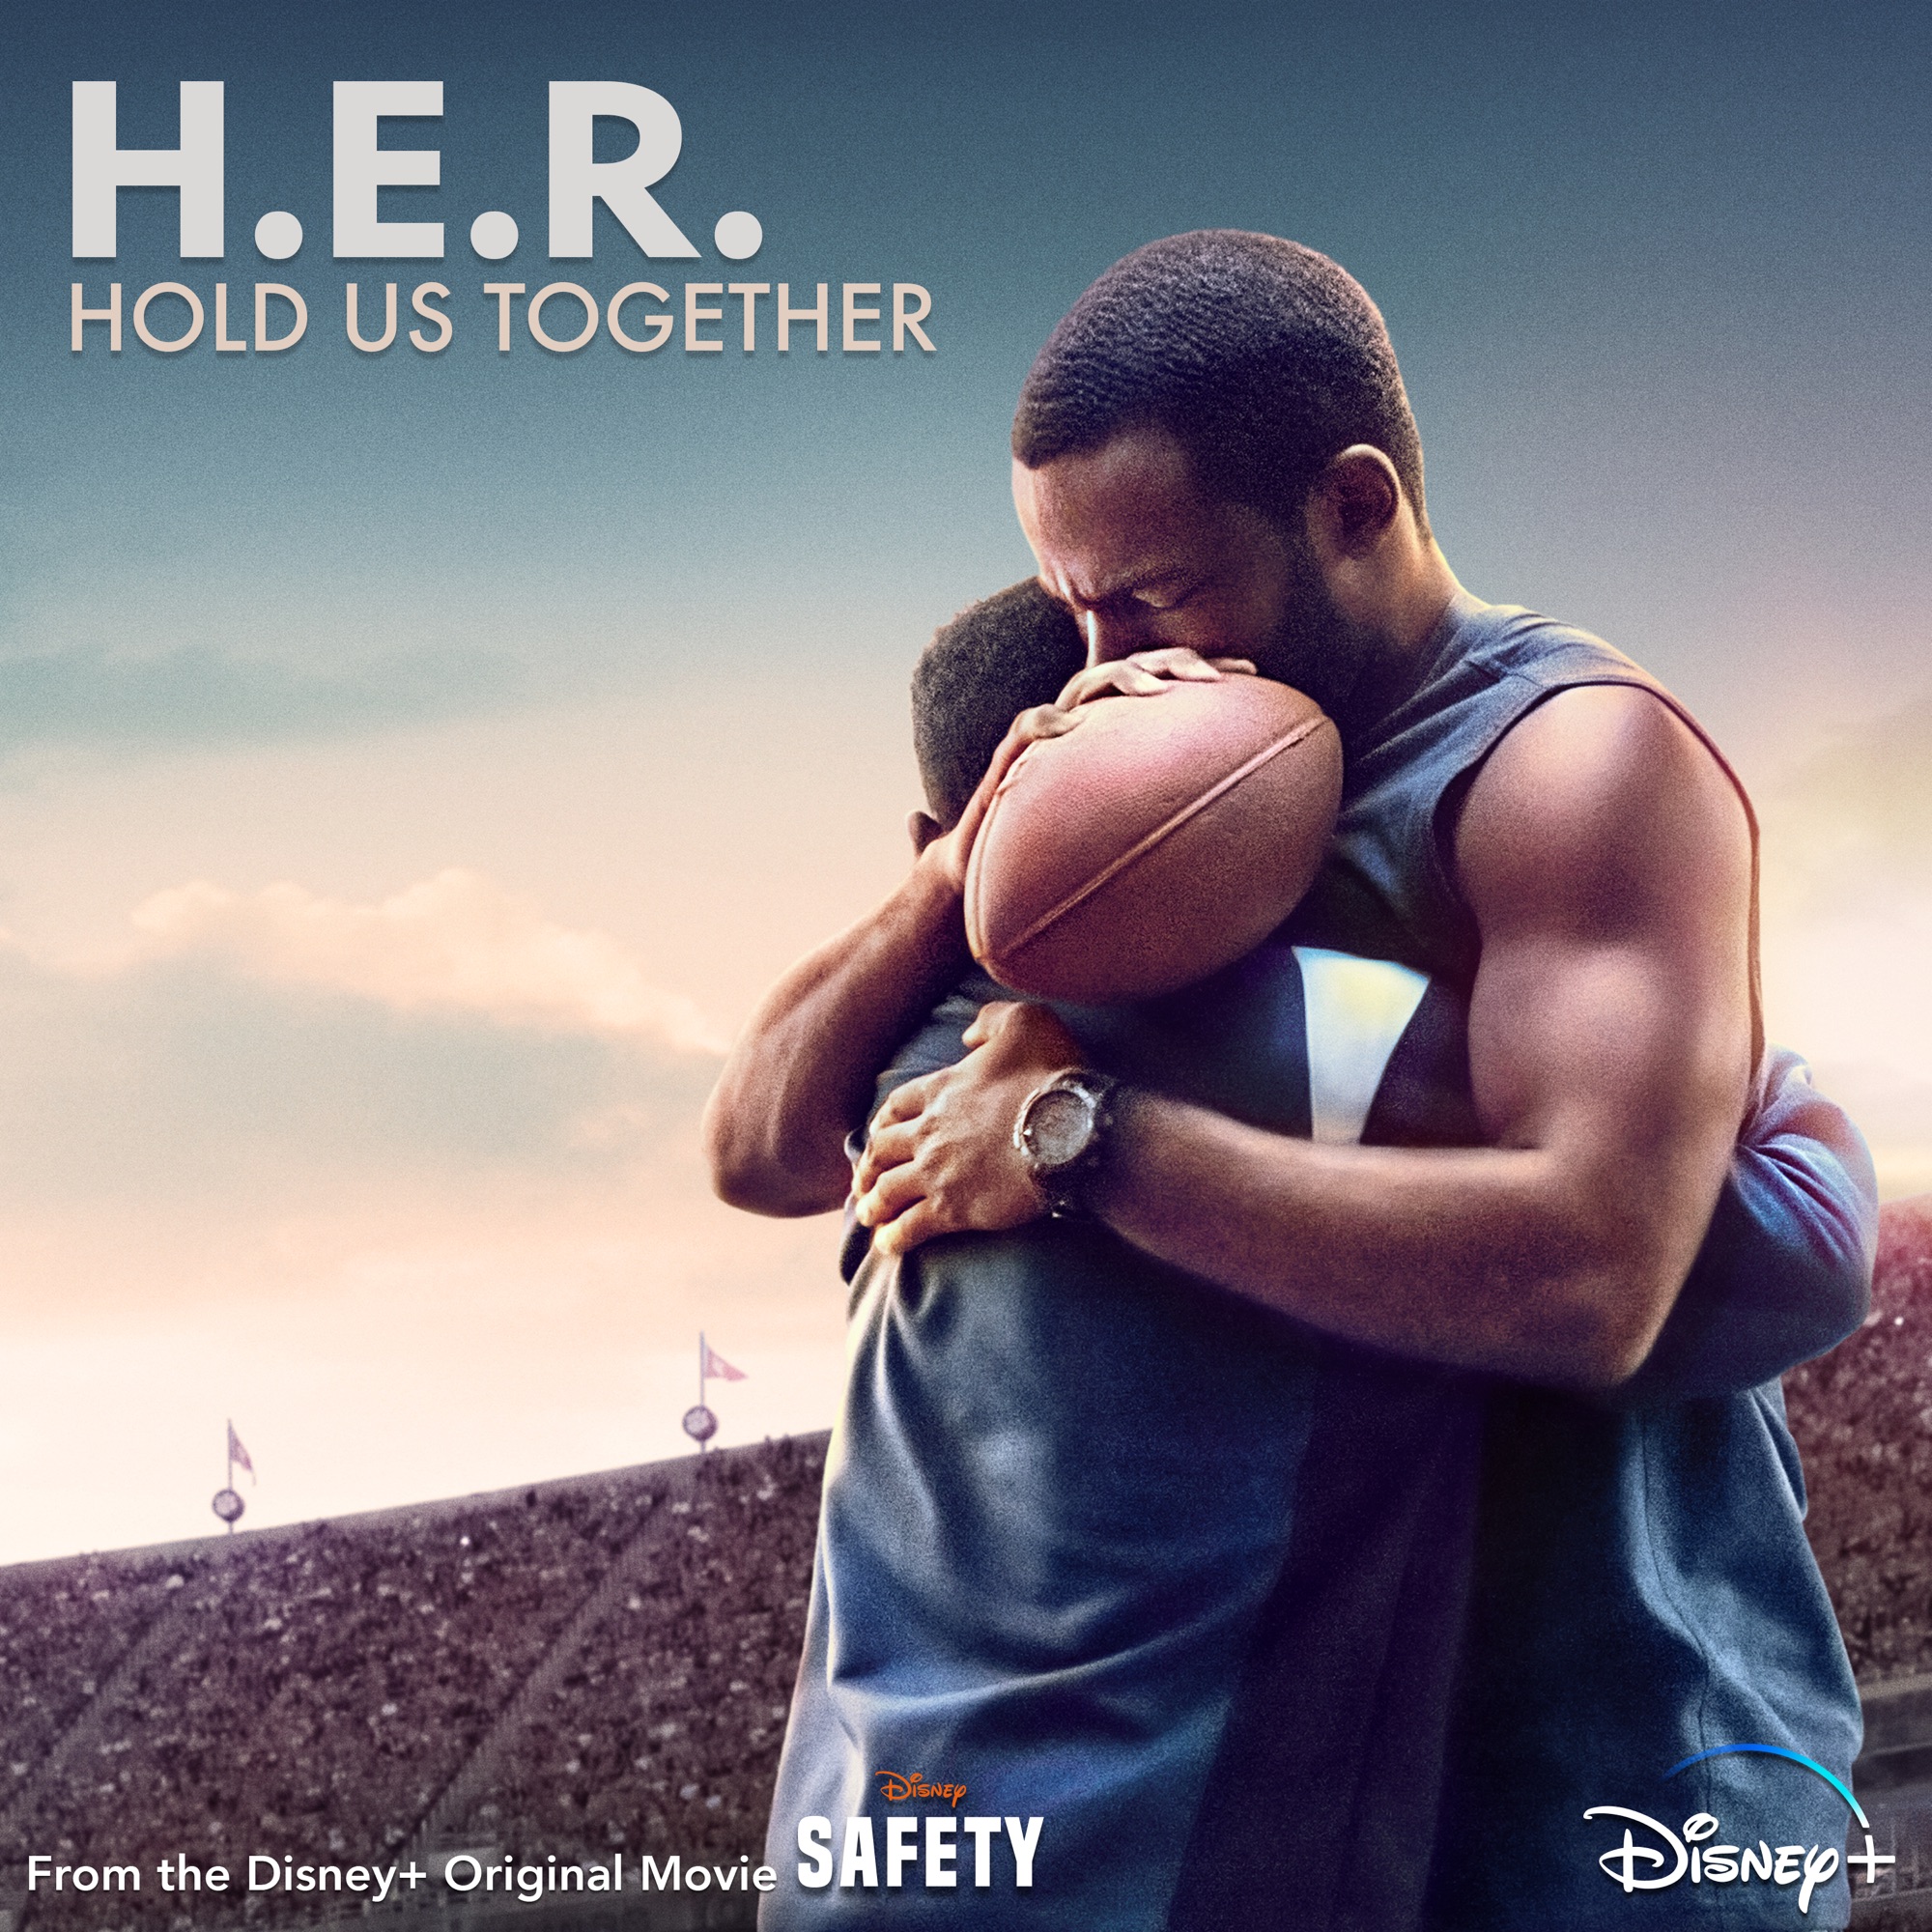 H.E.R. - Hold Us Together (From the Disney+ Original Motion Picture "Safety") - Single